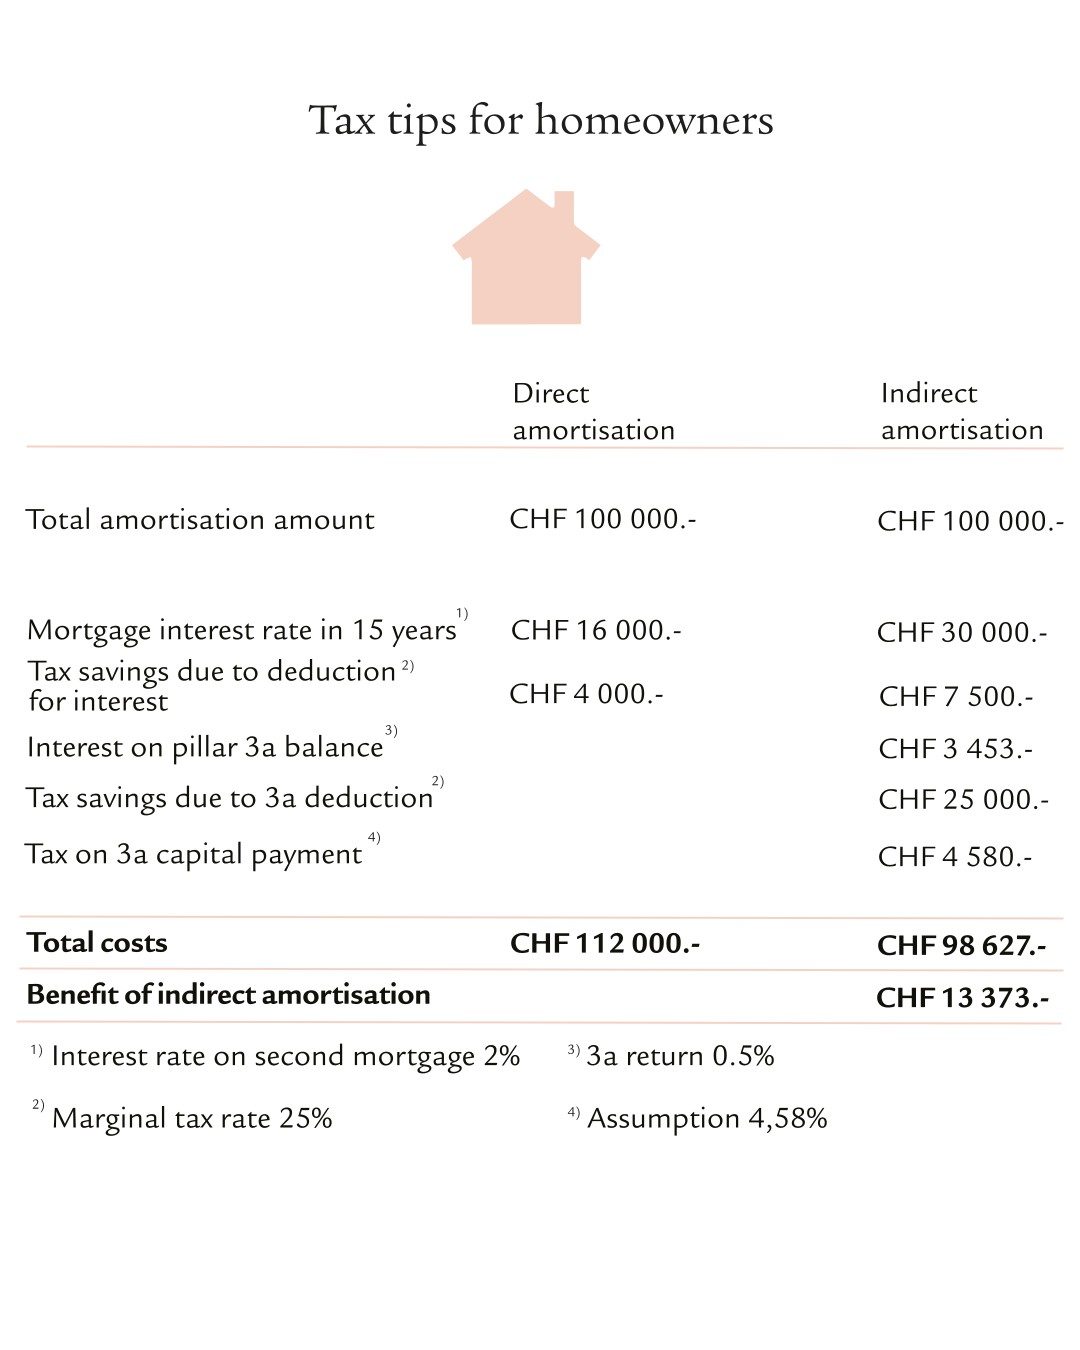 Table showing tax tips for homeowners